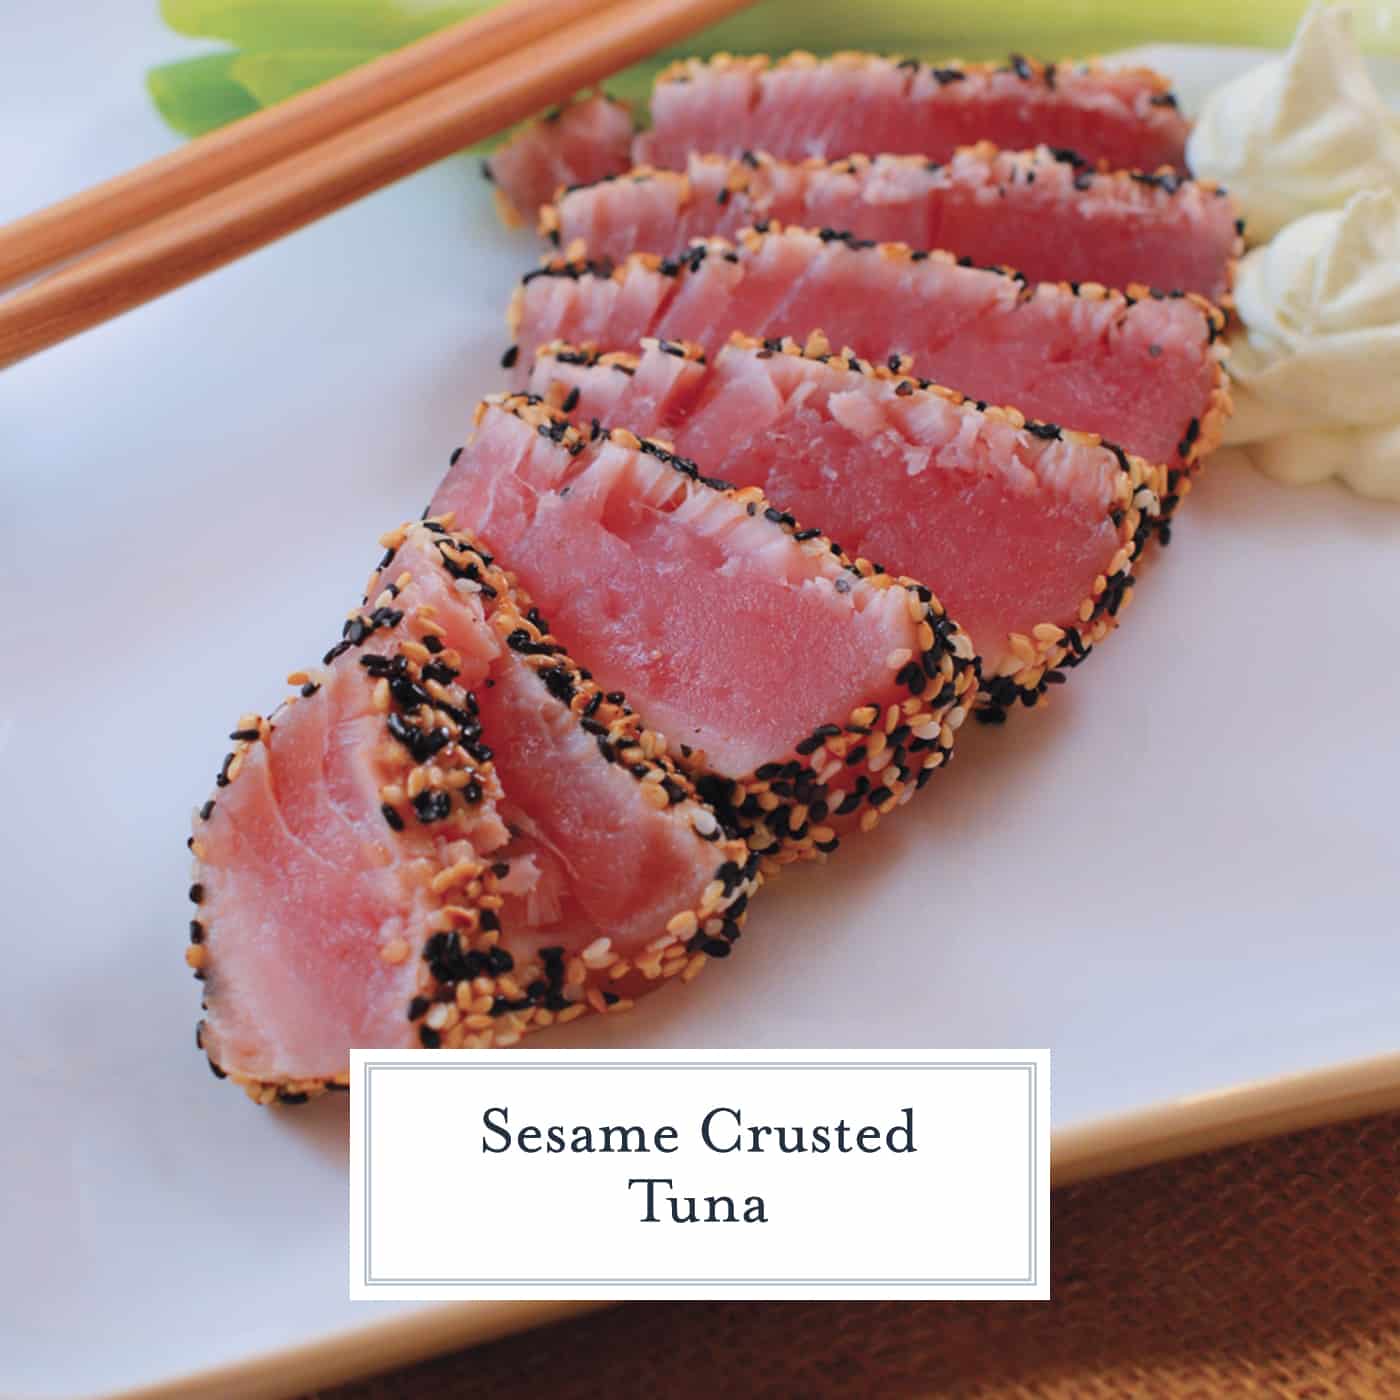 Sesame Crusted Tuna with Wasabi Whipped Cream is an easy and healthy meal that comes together in 15 minutes. #tunarecipe #tunasteakrecipe www.savoryexperiments.com